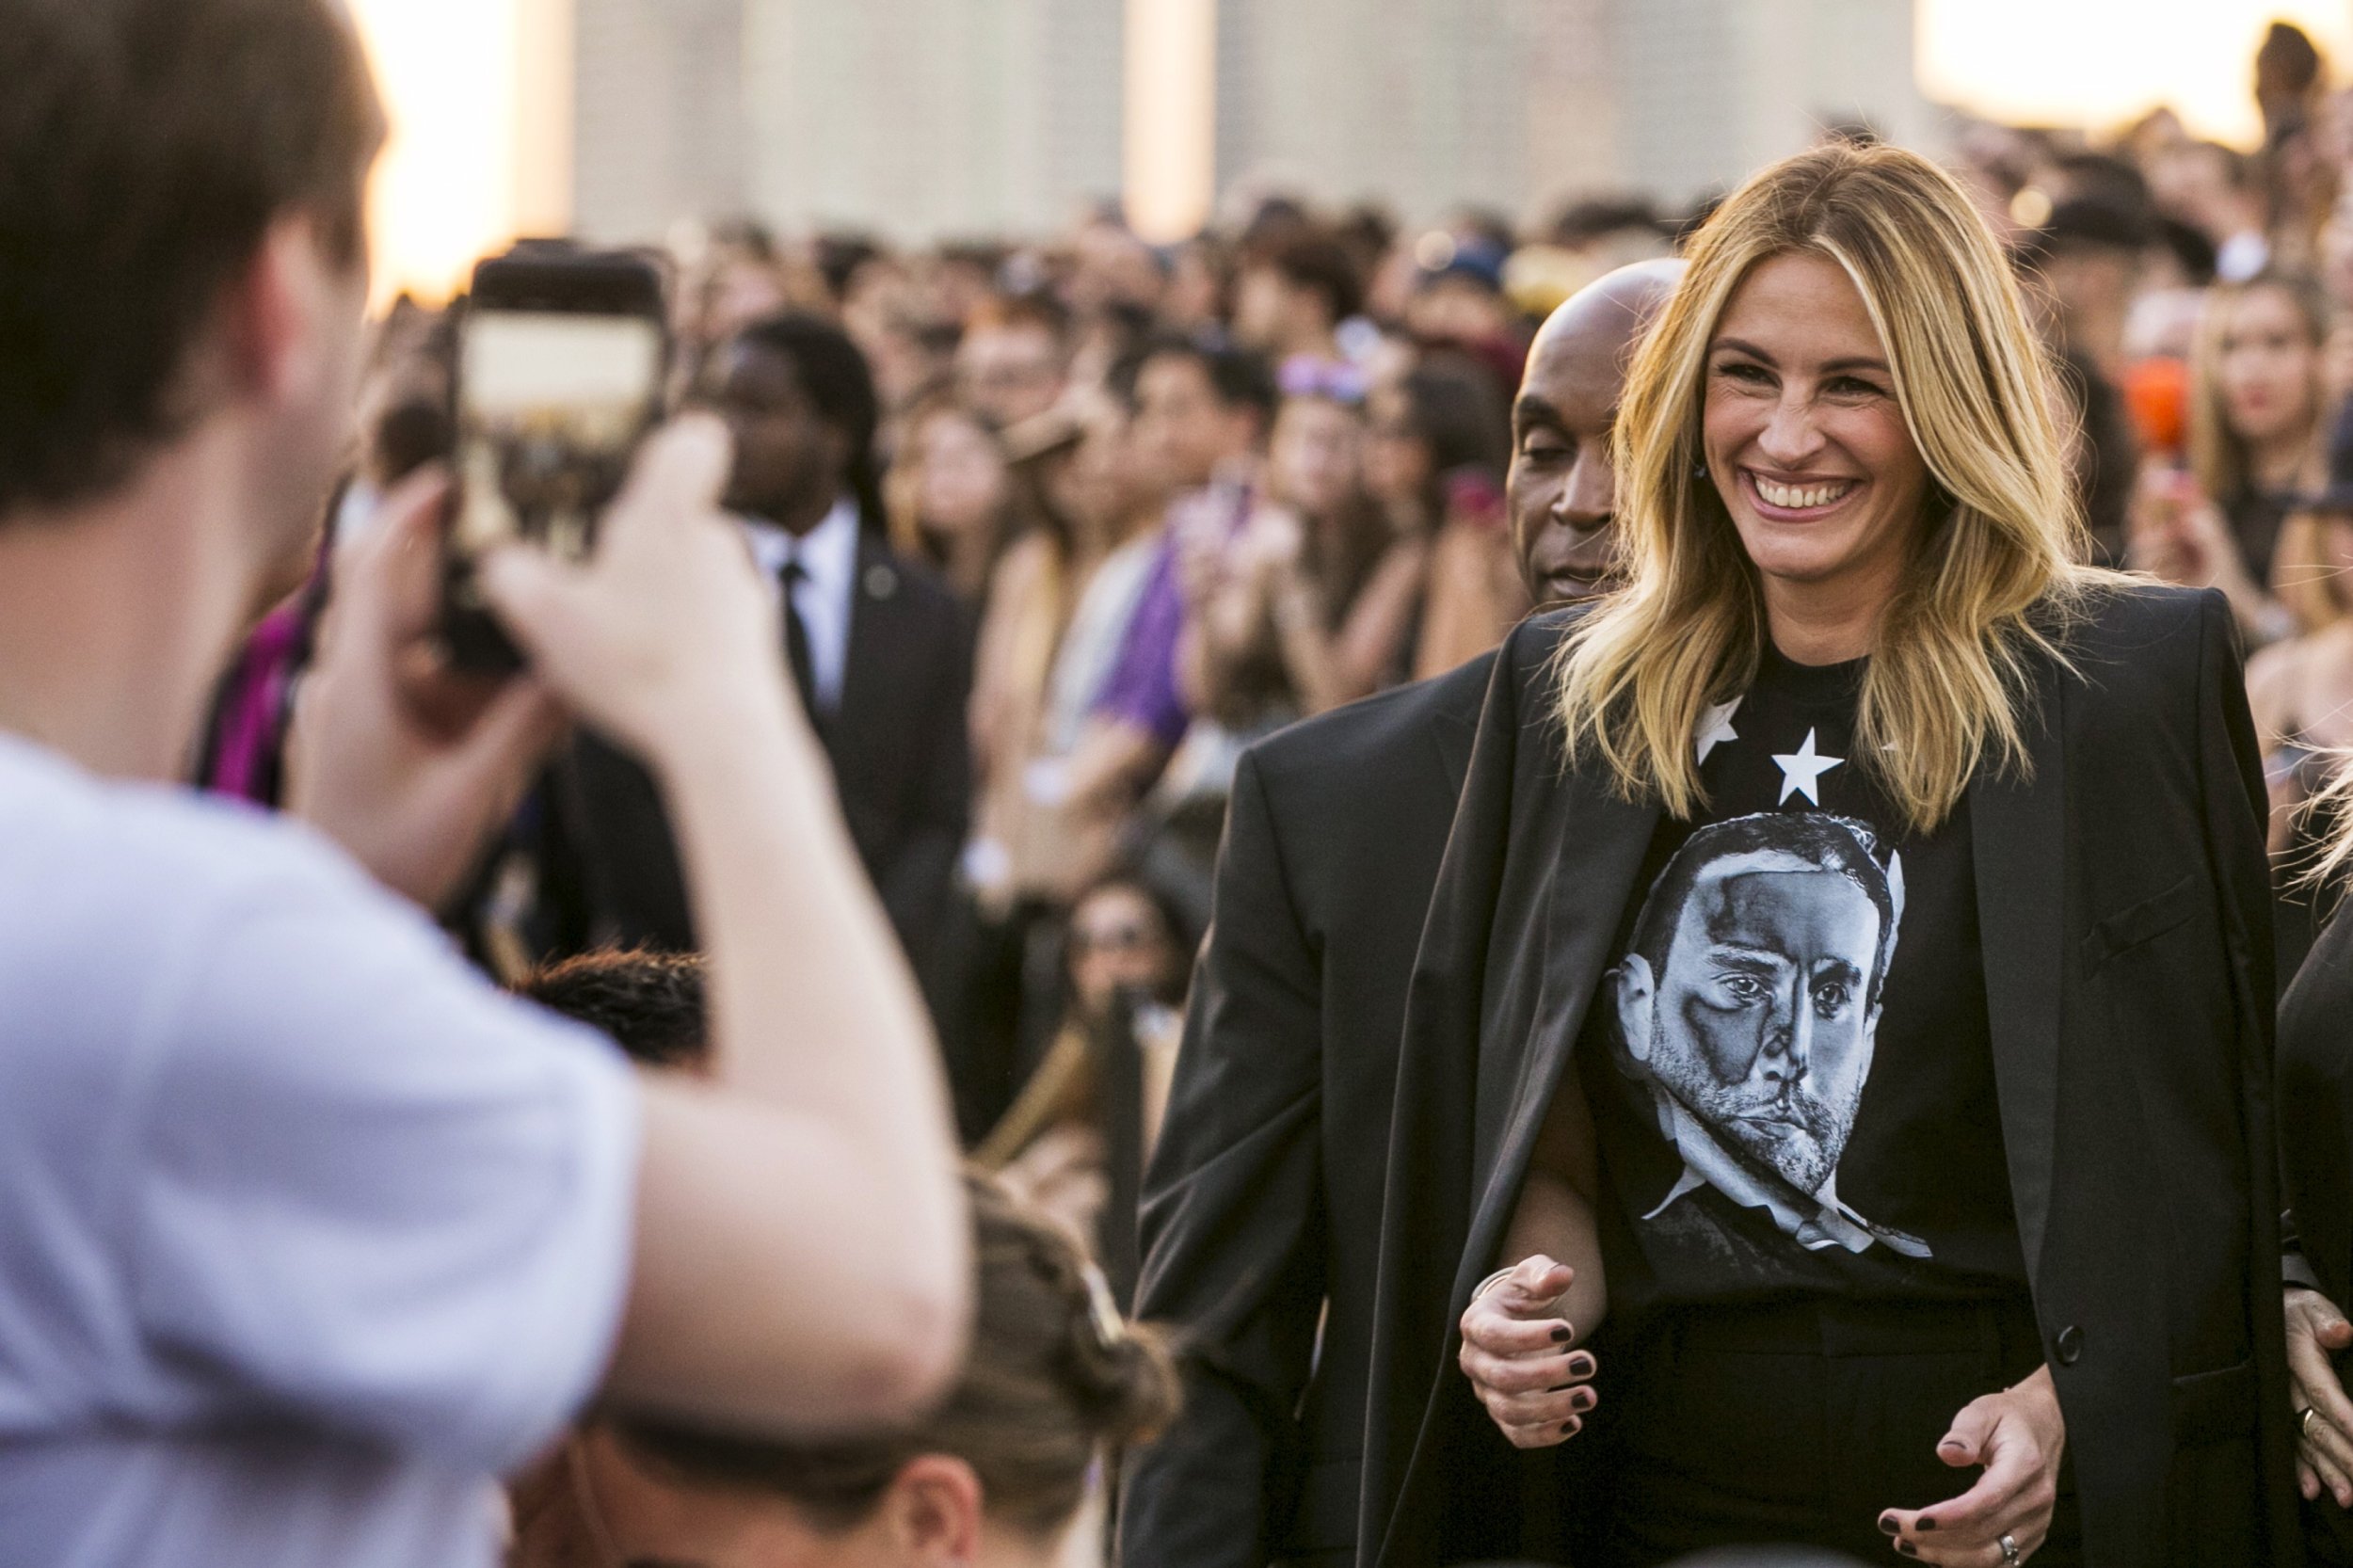 1430 Actress Julia Roberts greets attendees as she arrives for a presentation of the Givenchy SpringSummer 2016 collection